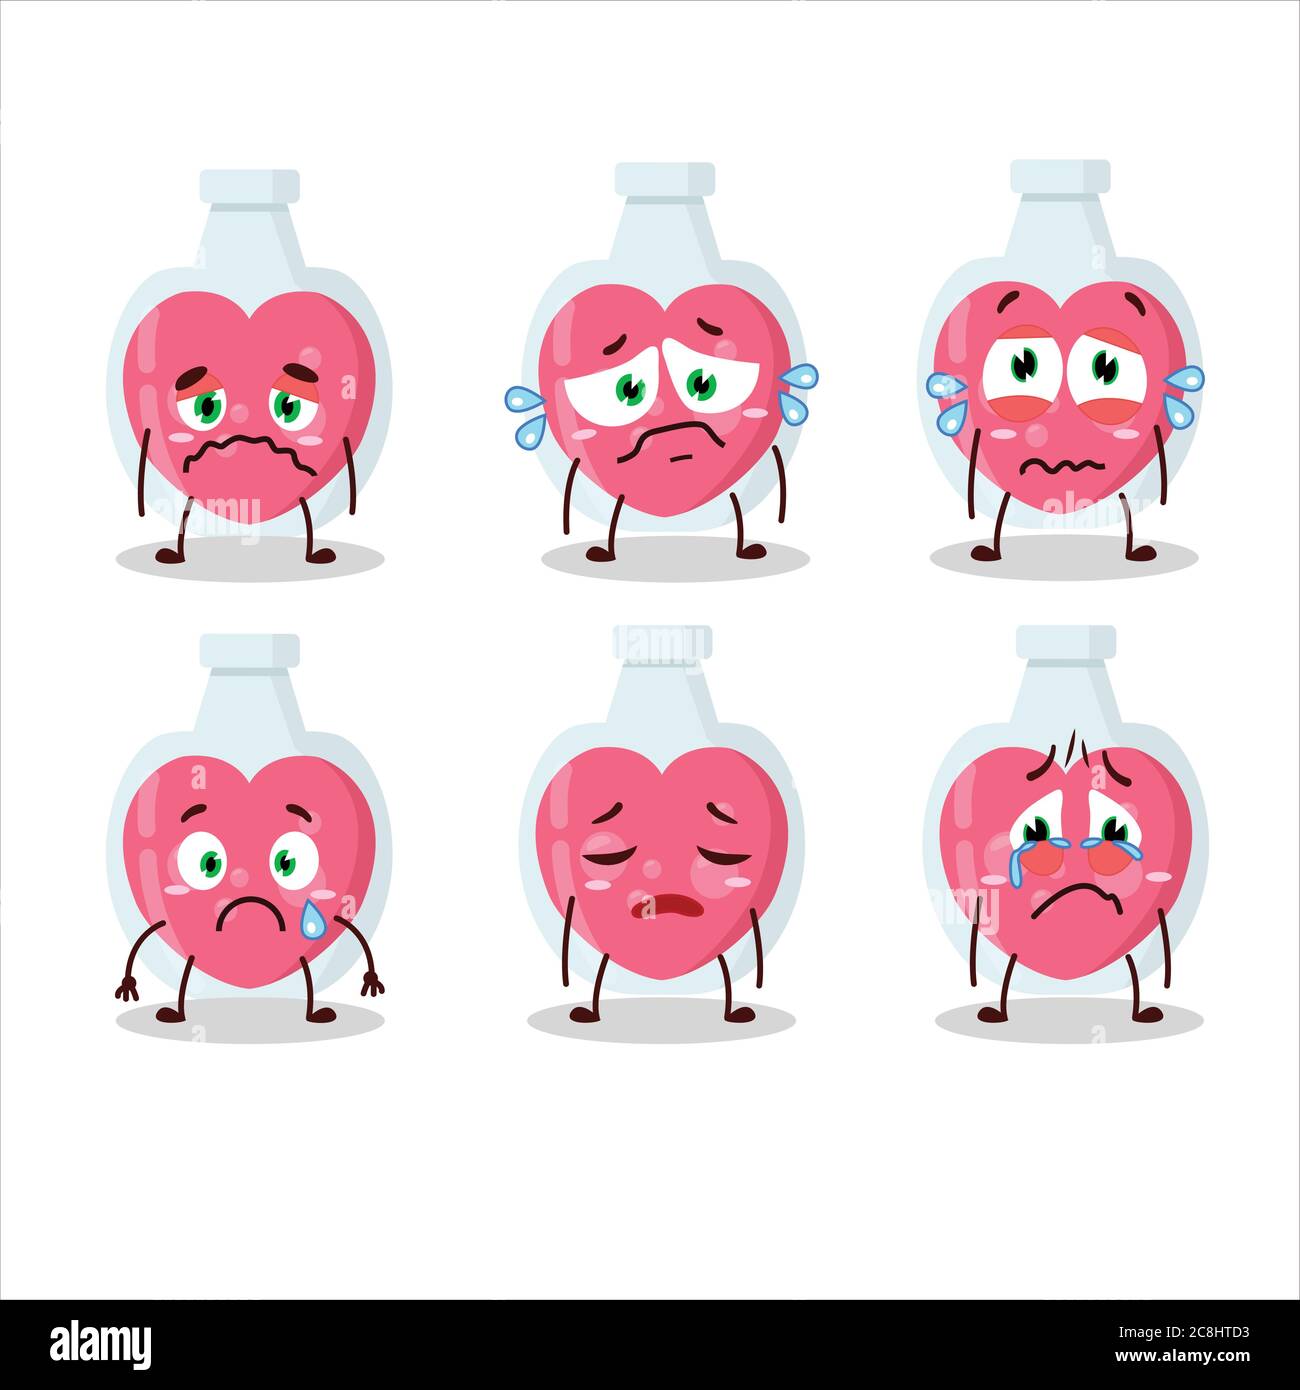 Love potion cartoon character with sad expression Stock Vector